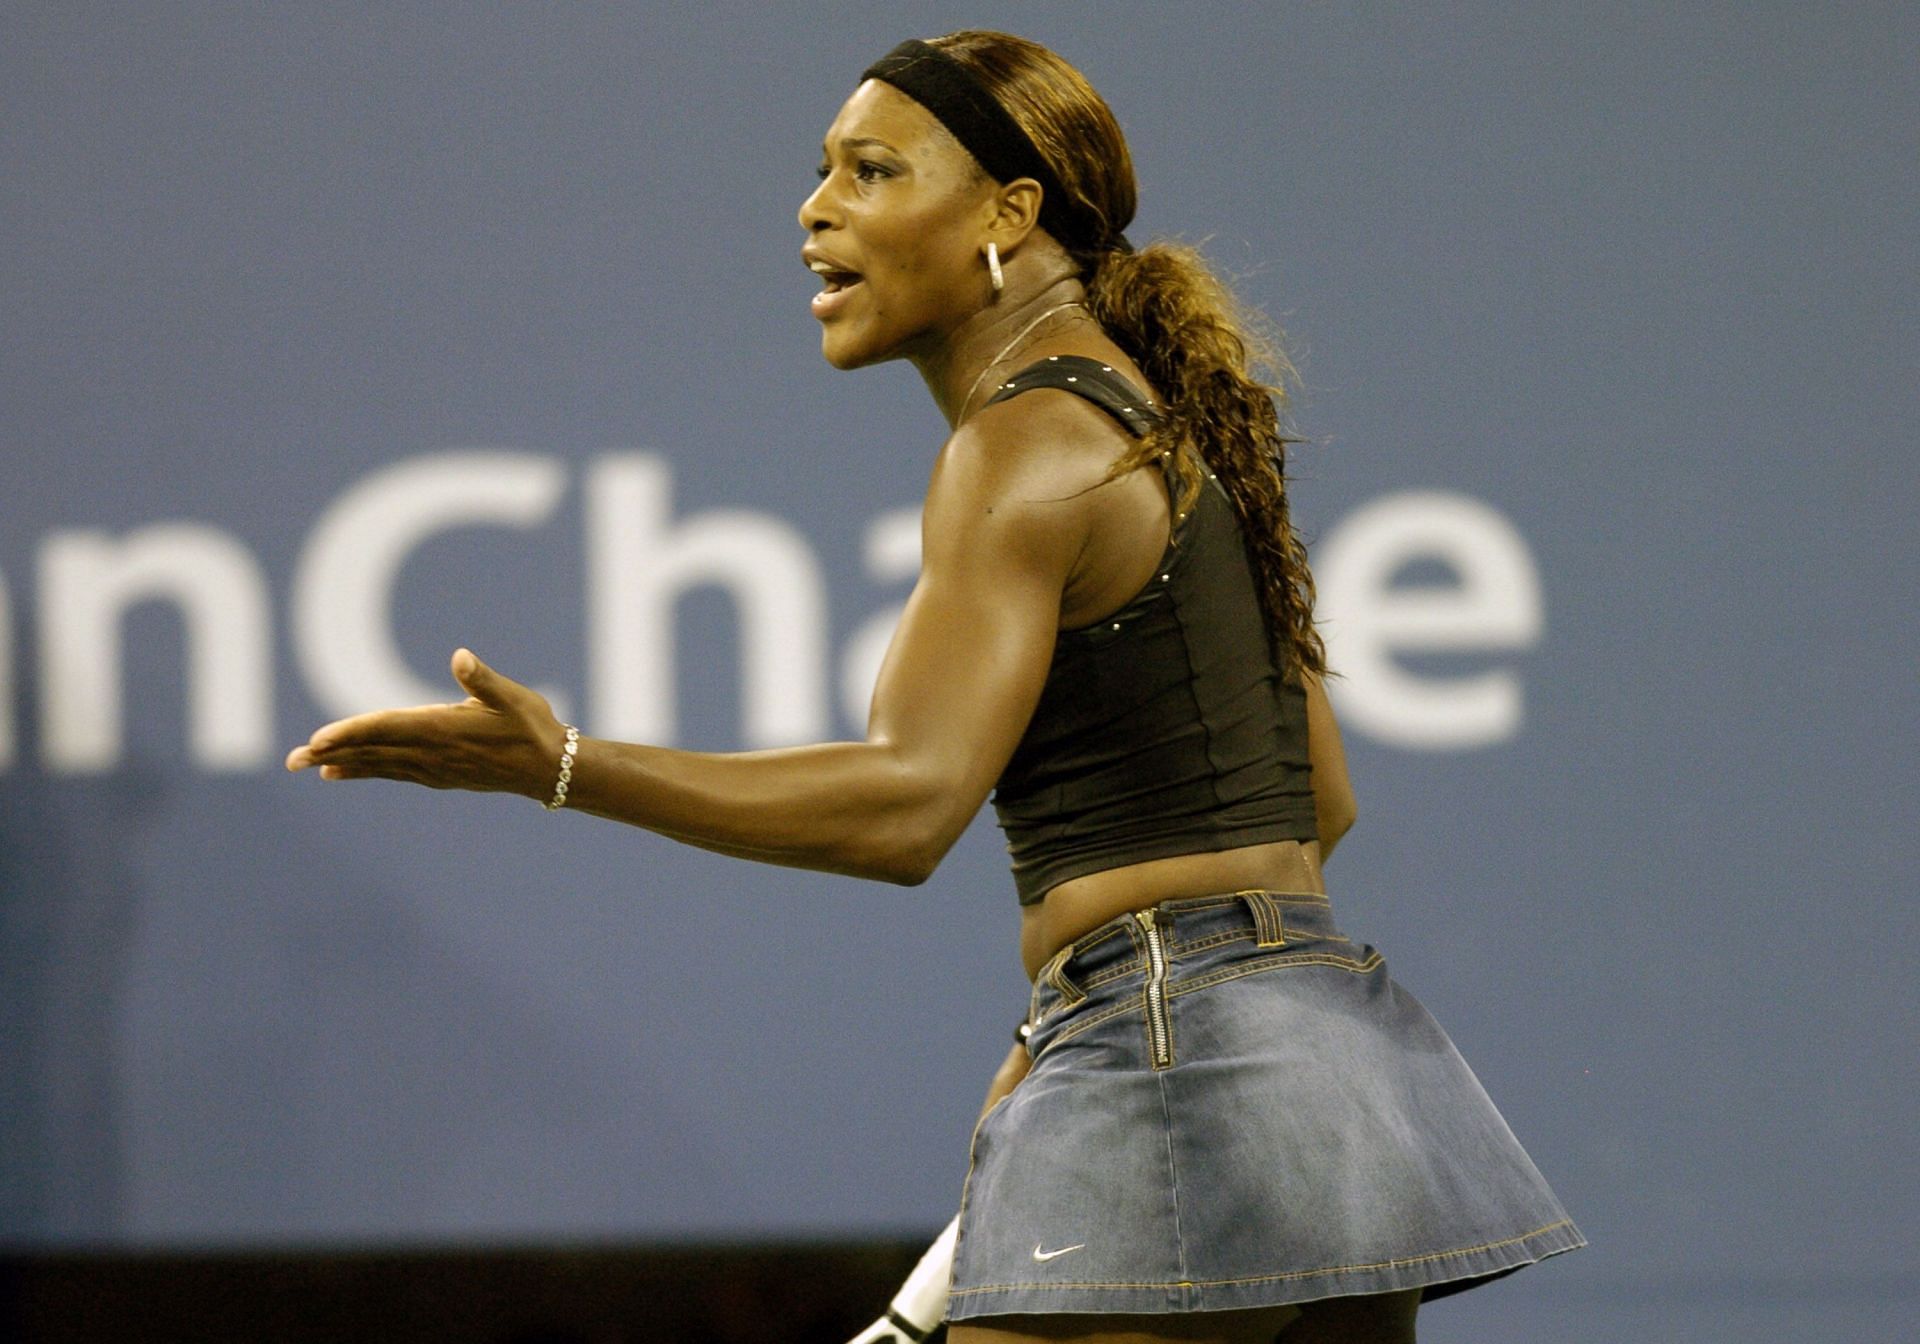 Serena Williams at the 2004 US Open